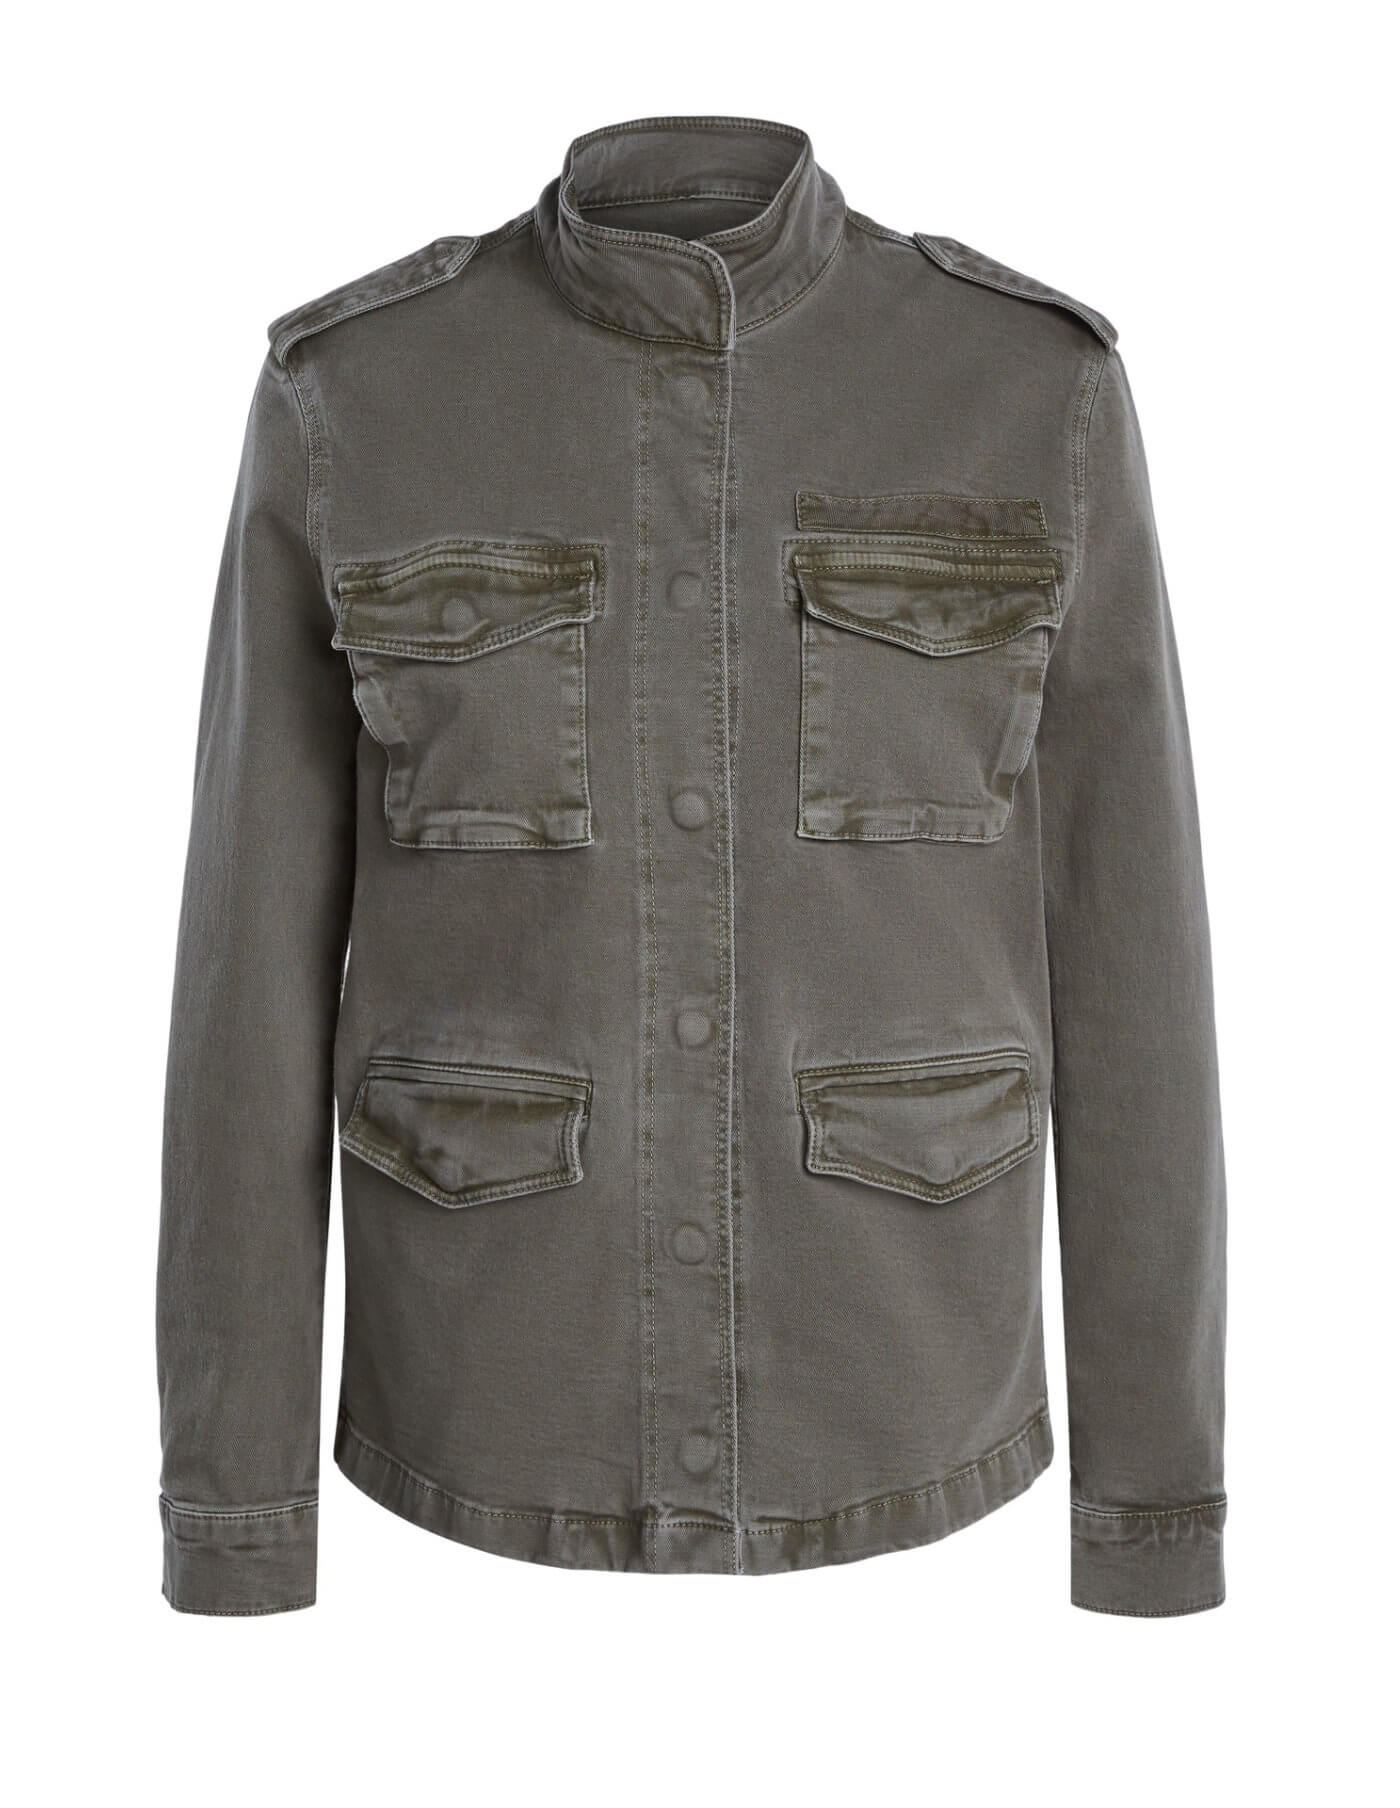 Set Army Jacket In Army Green at Storm Fashion